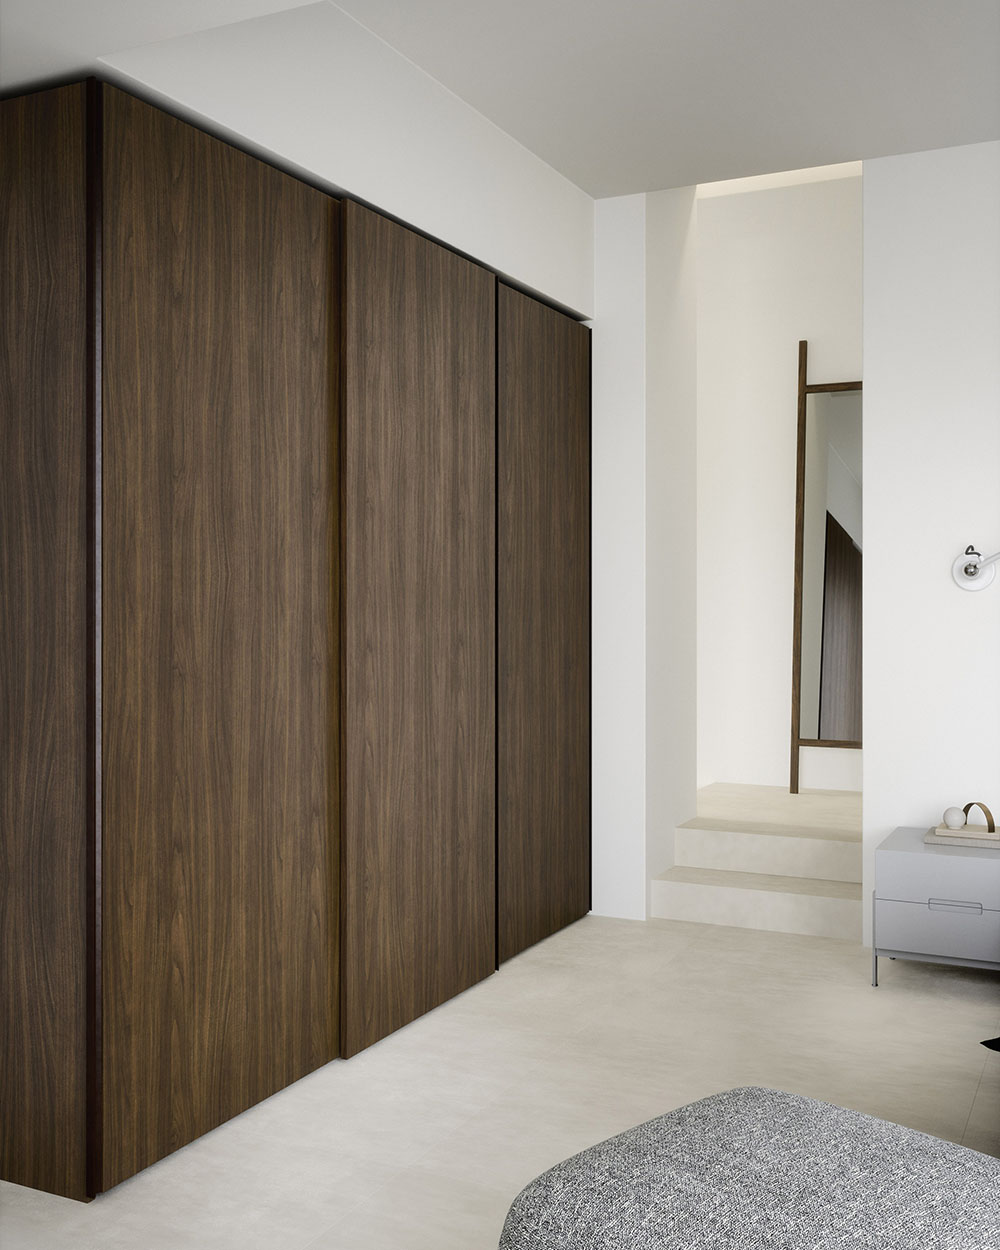 Contemporary sliding wardrobe designed and fitted by Krieder.